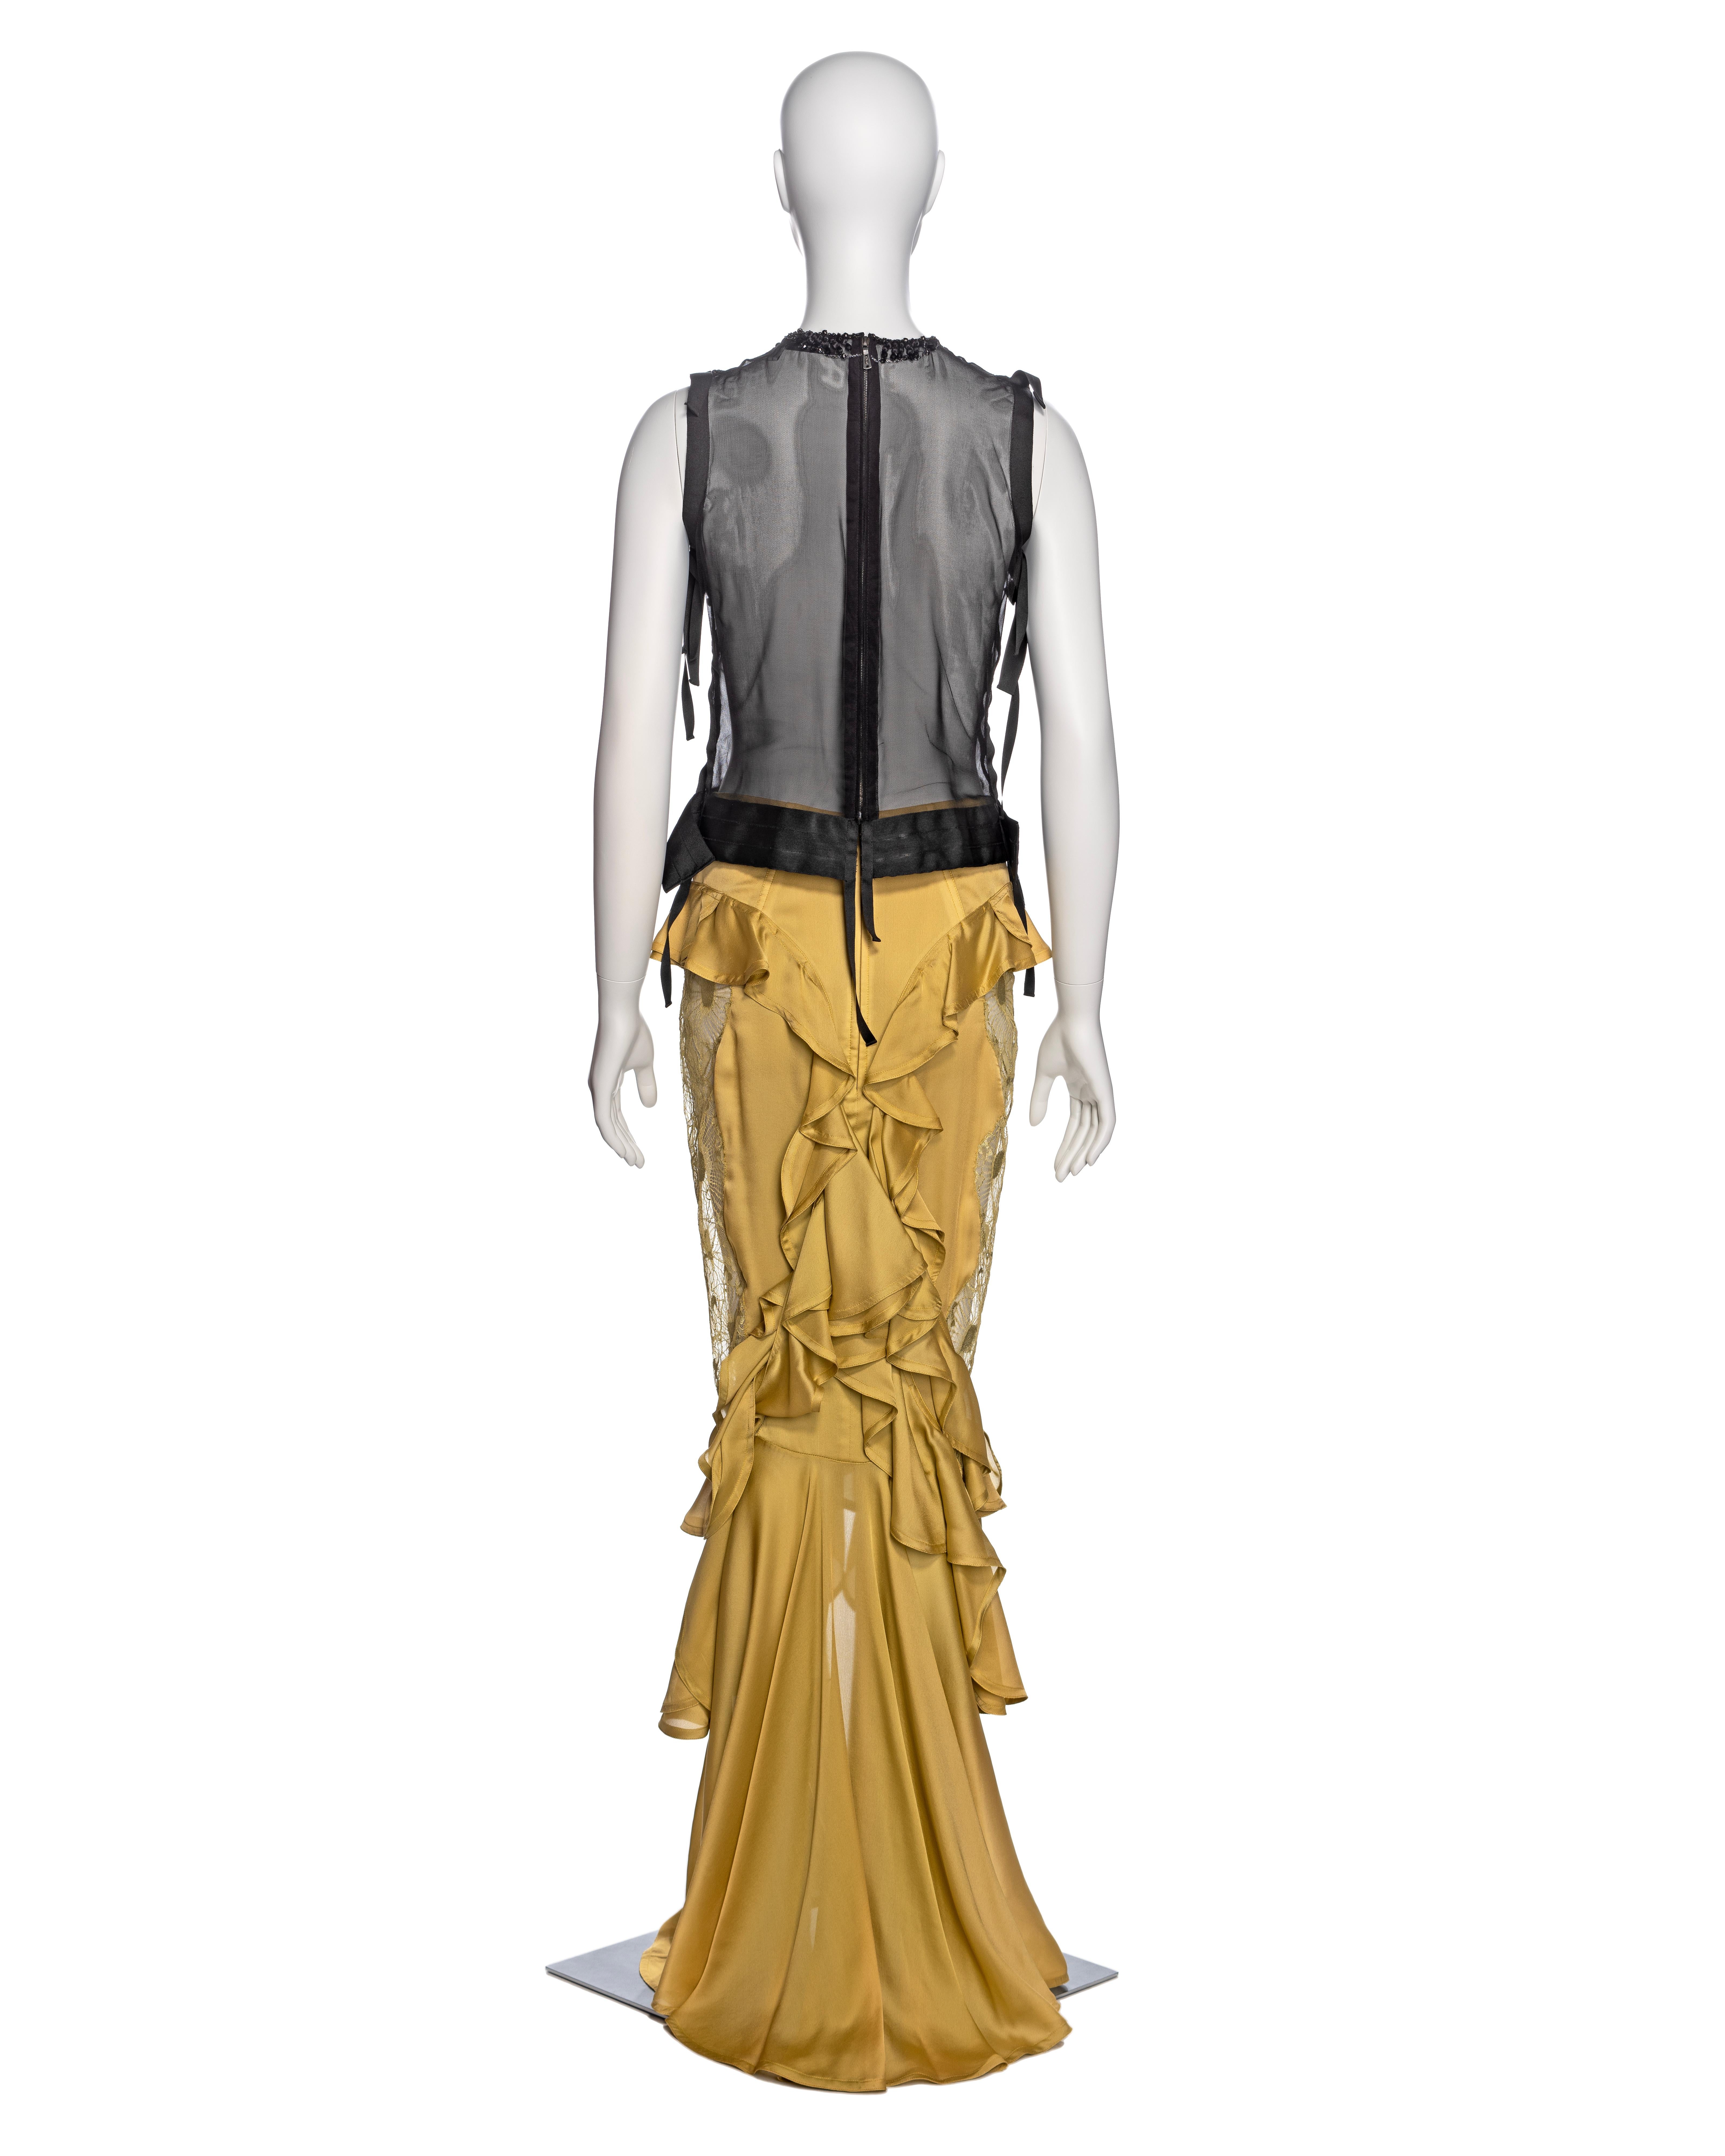 Yves Saint Laurent by Tom Ford Embellished Top and Silk Skirt Ensemble, FW 2003 8